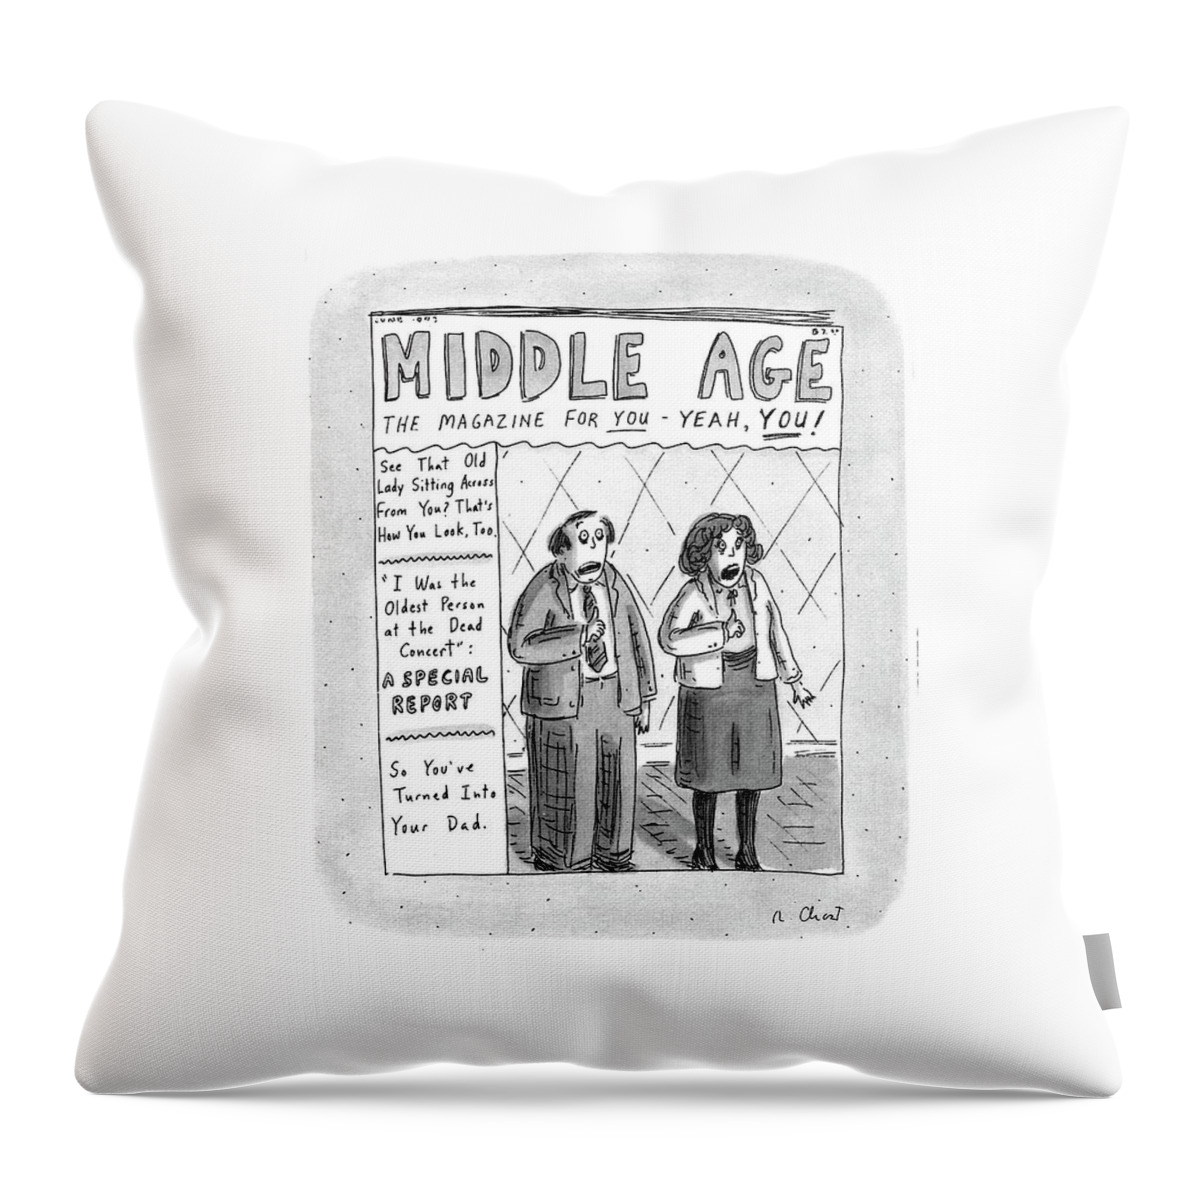 Middle Age
The Magazine For You - Yeah Throw Pillow